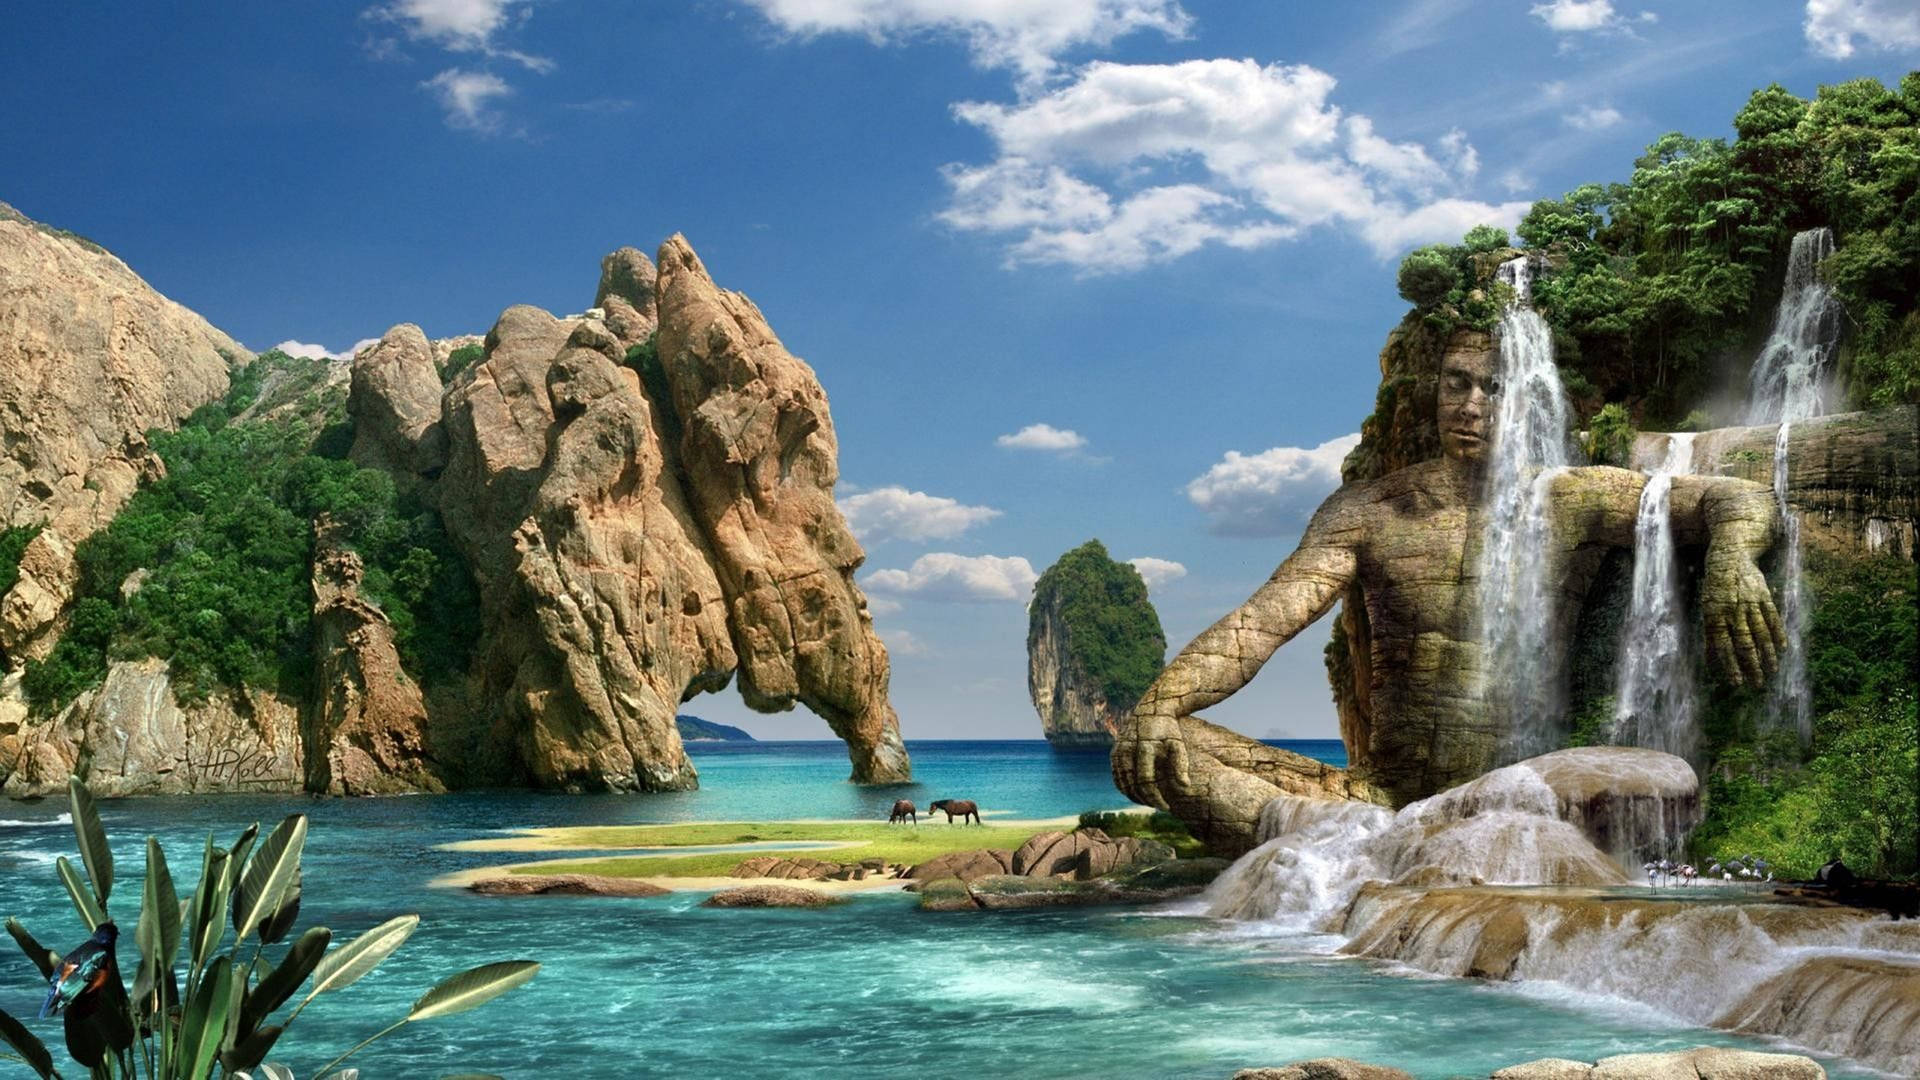 Majestic Elephant Rock And Waterfall In Full Hd Background